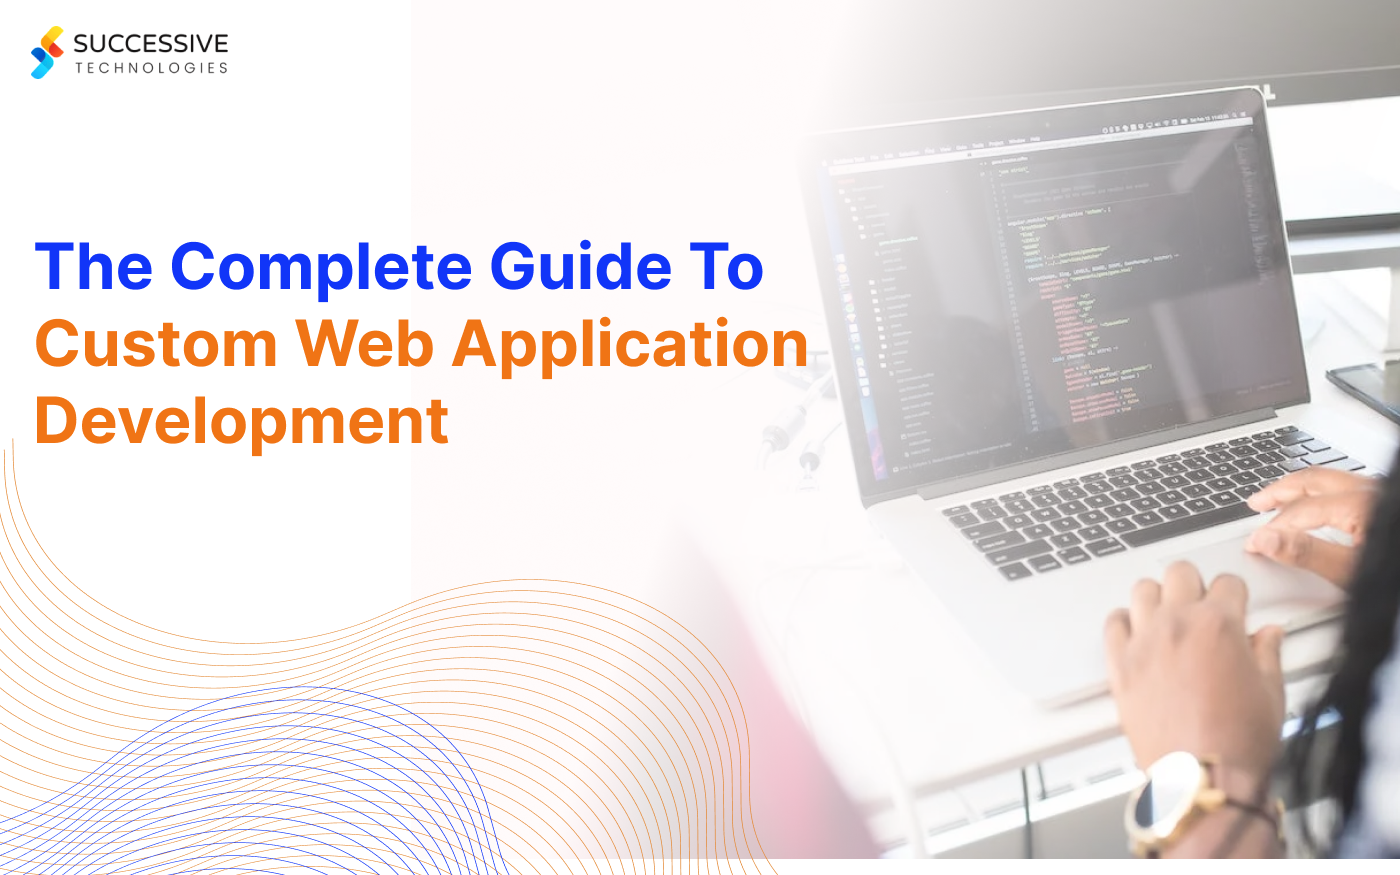 The Complete Guide To Custom Web Application Development